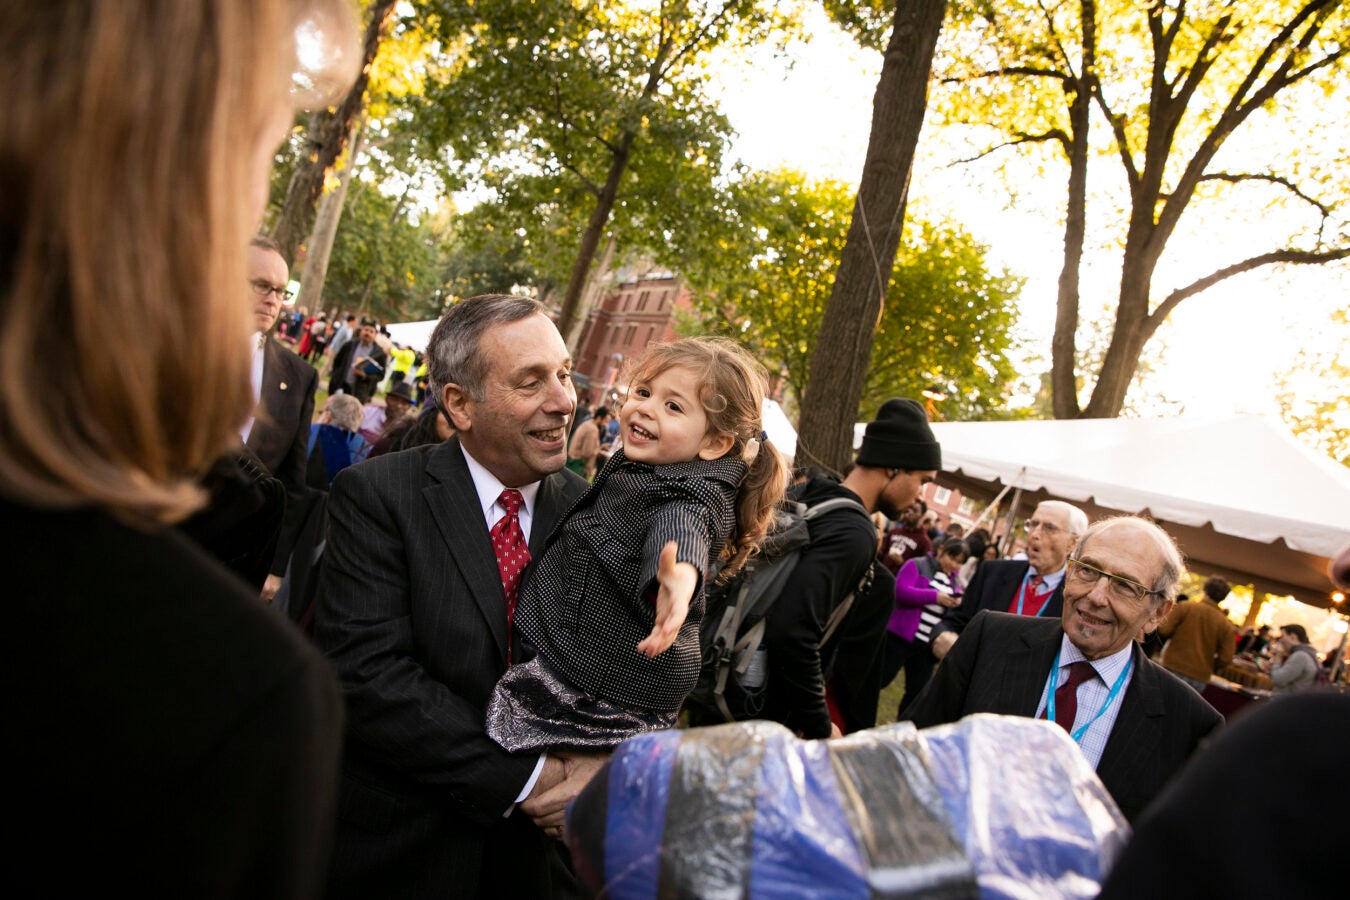 Larry Bacow with granddaughter at his inauguration as Harvard president.